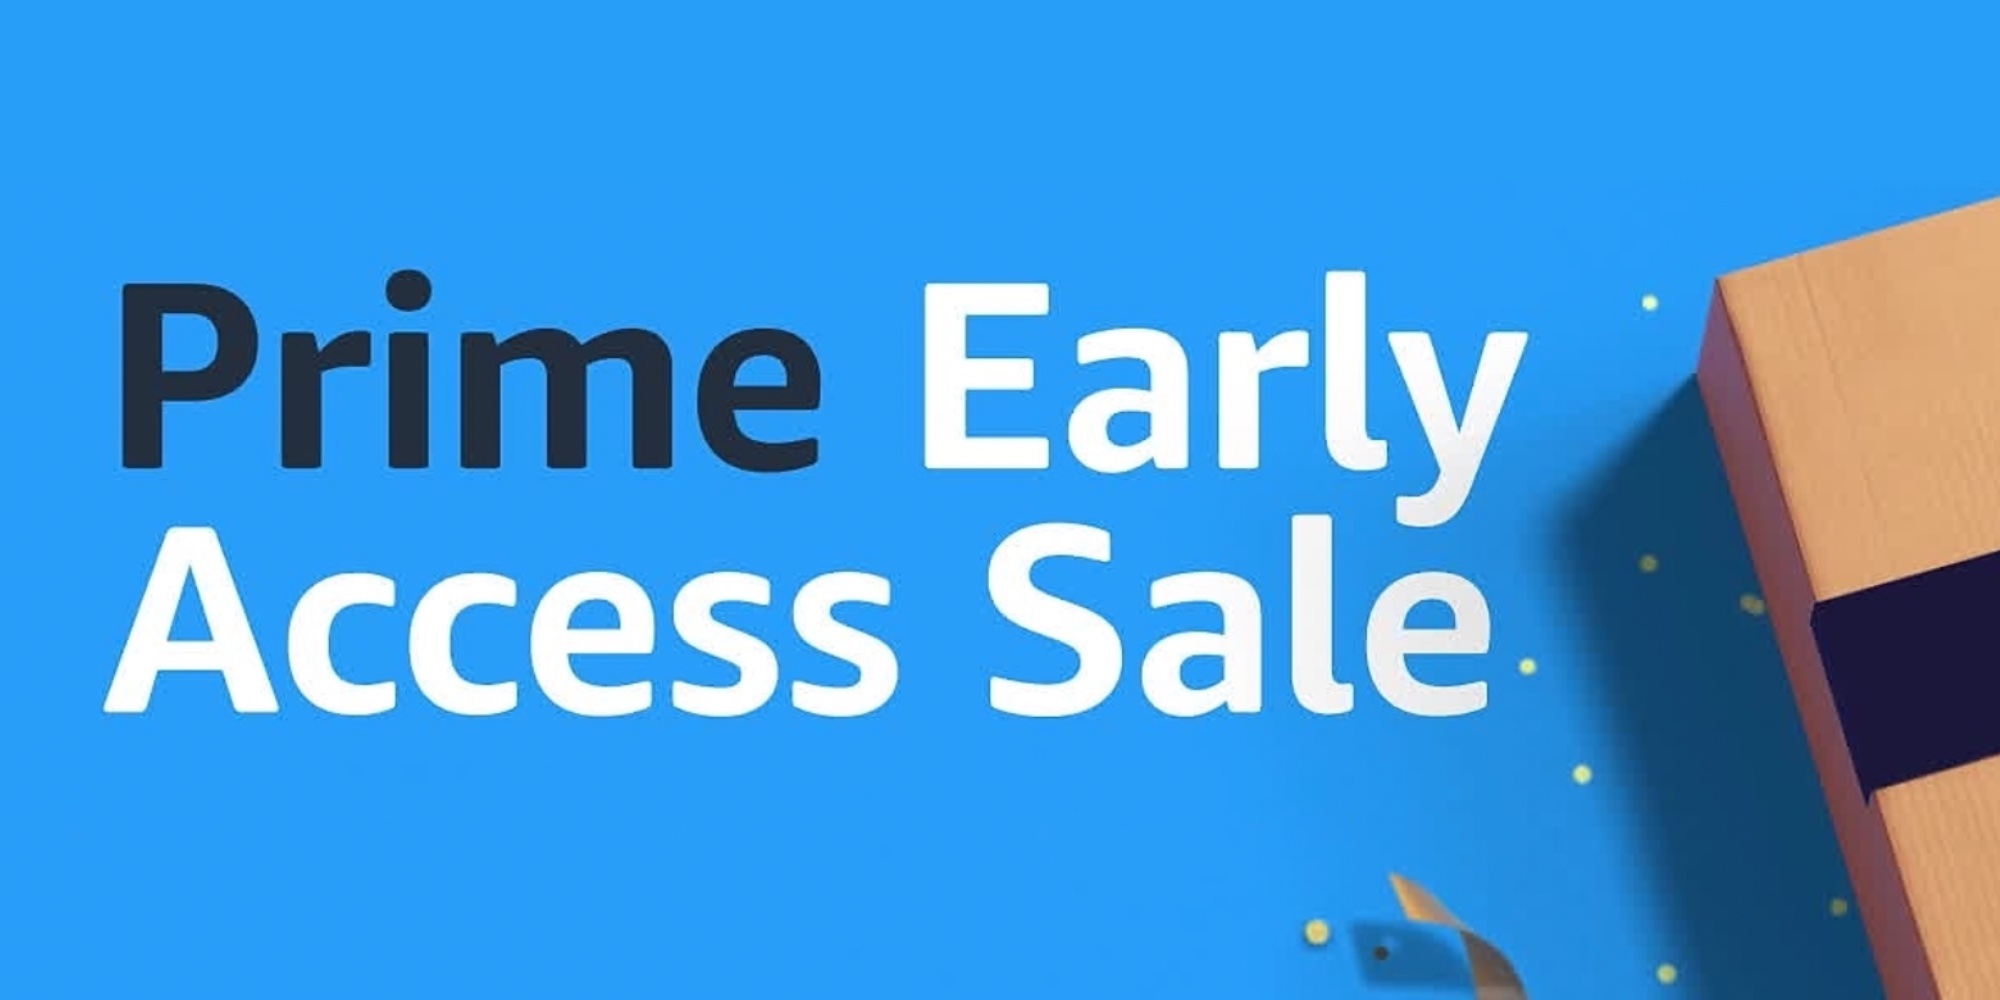 Prime Early Access Sale 2022: Event dates announced